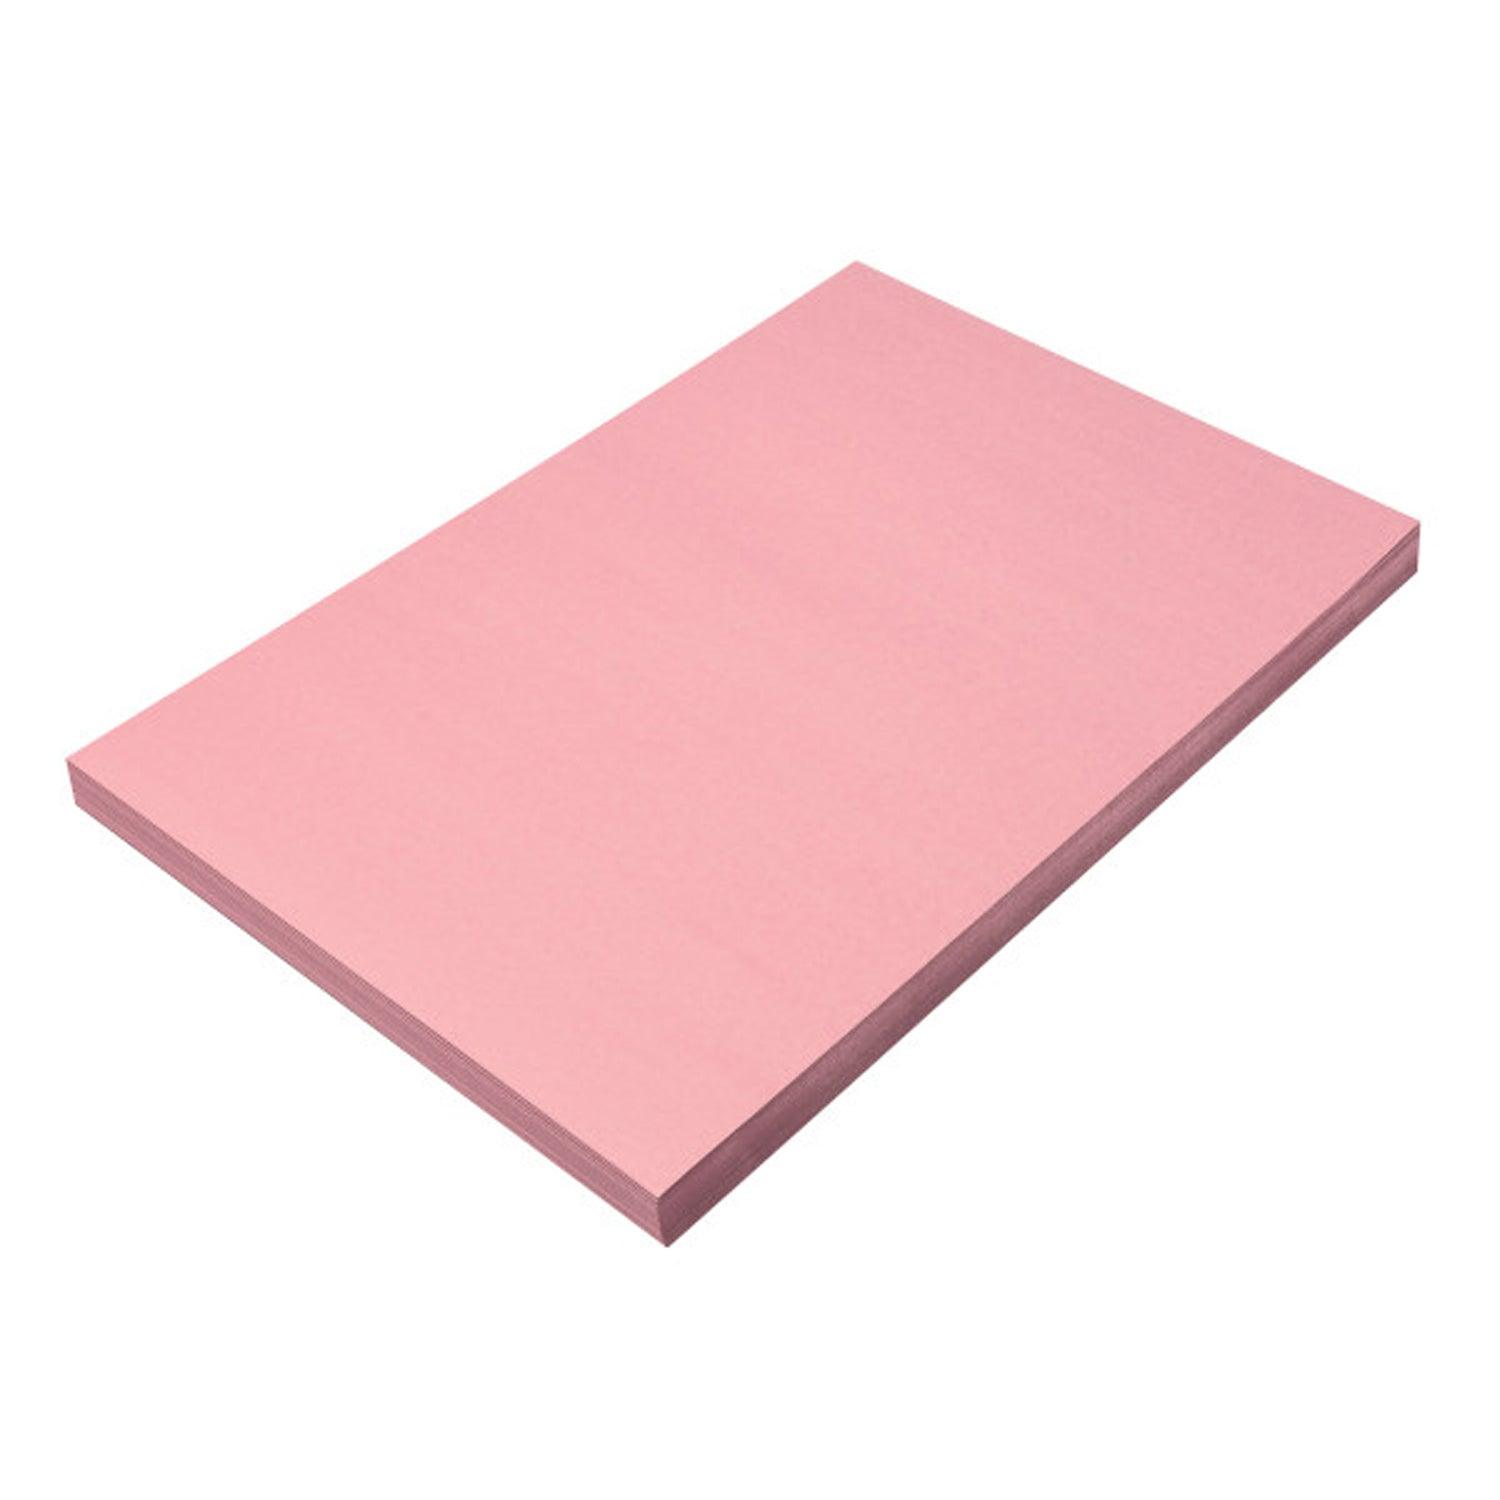 Construction Paper, Pink, 12" x 18", 100 Sheets Per Pack, 5 Packs - Loomini